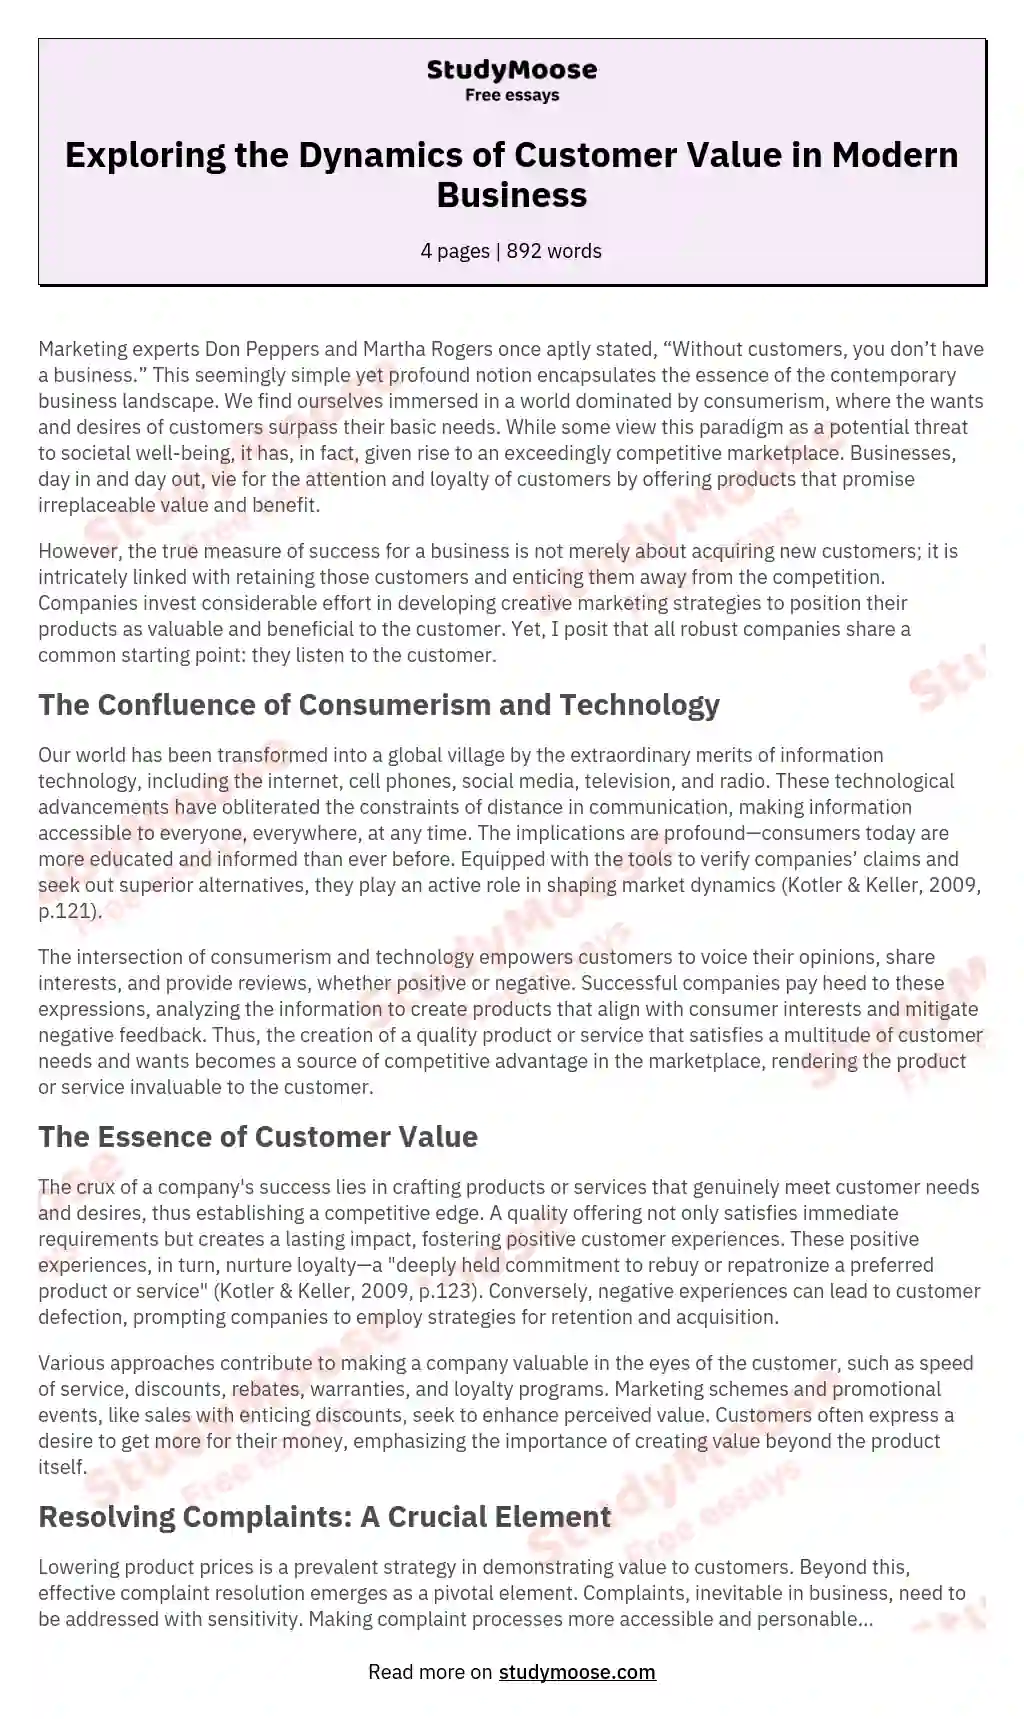 Exploring the Dynamics of Customer Value in Modern Business essay